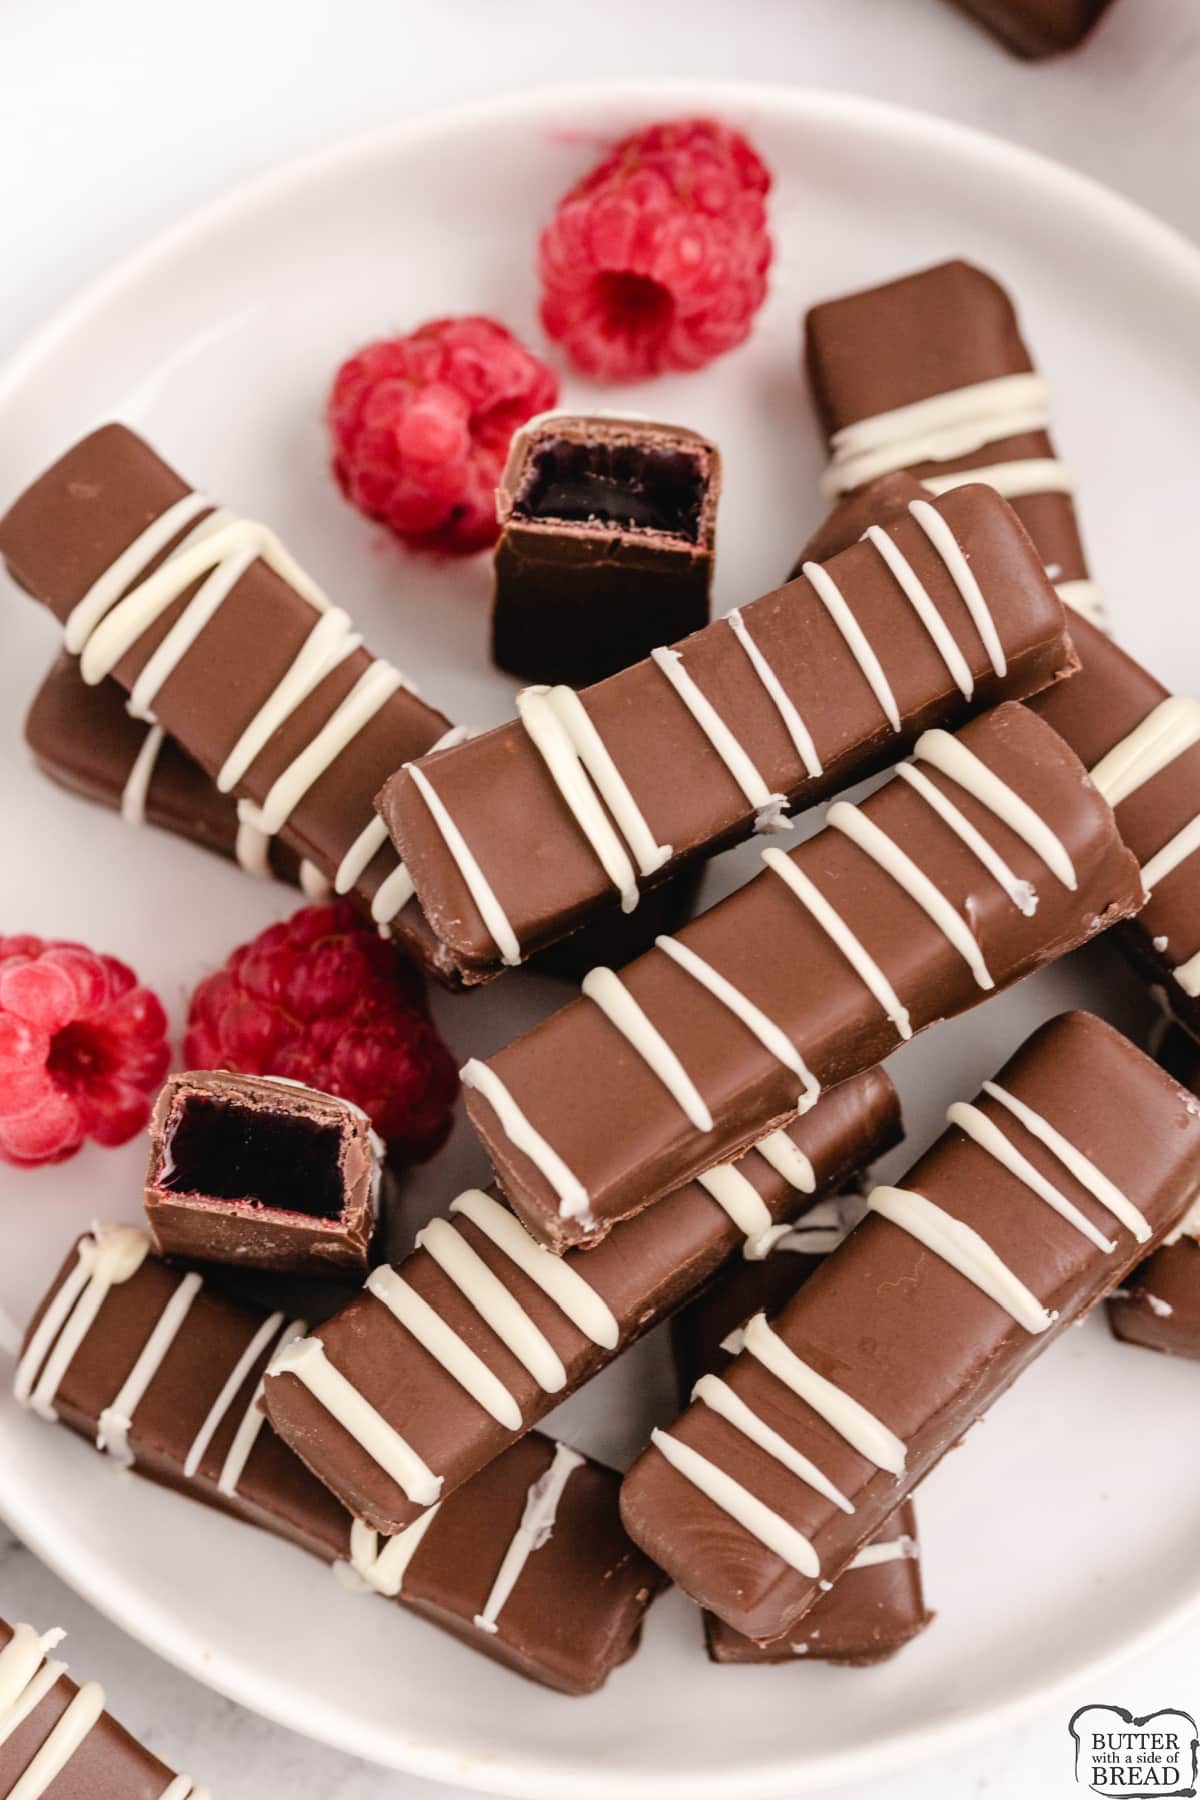 Chocolate Raspberry Sticks are made with a delicious raspberry jelly filling dipped in melted chocolate. Simple chocolate candy recipe that is so easy to make!